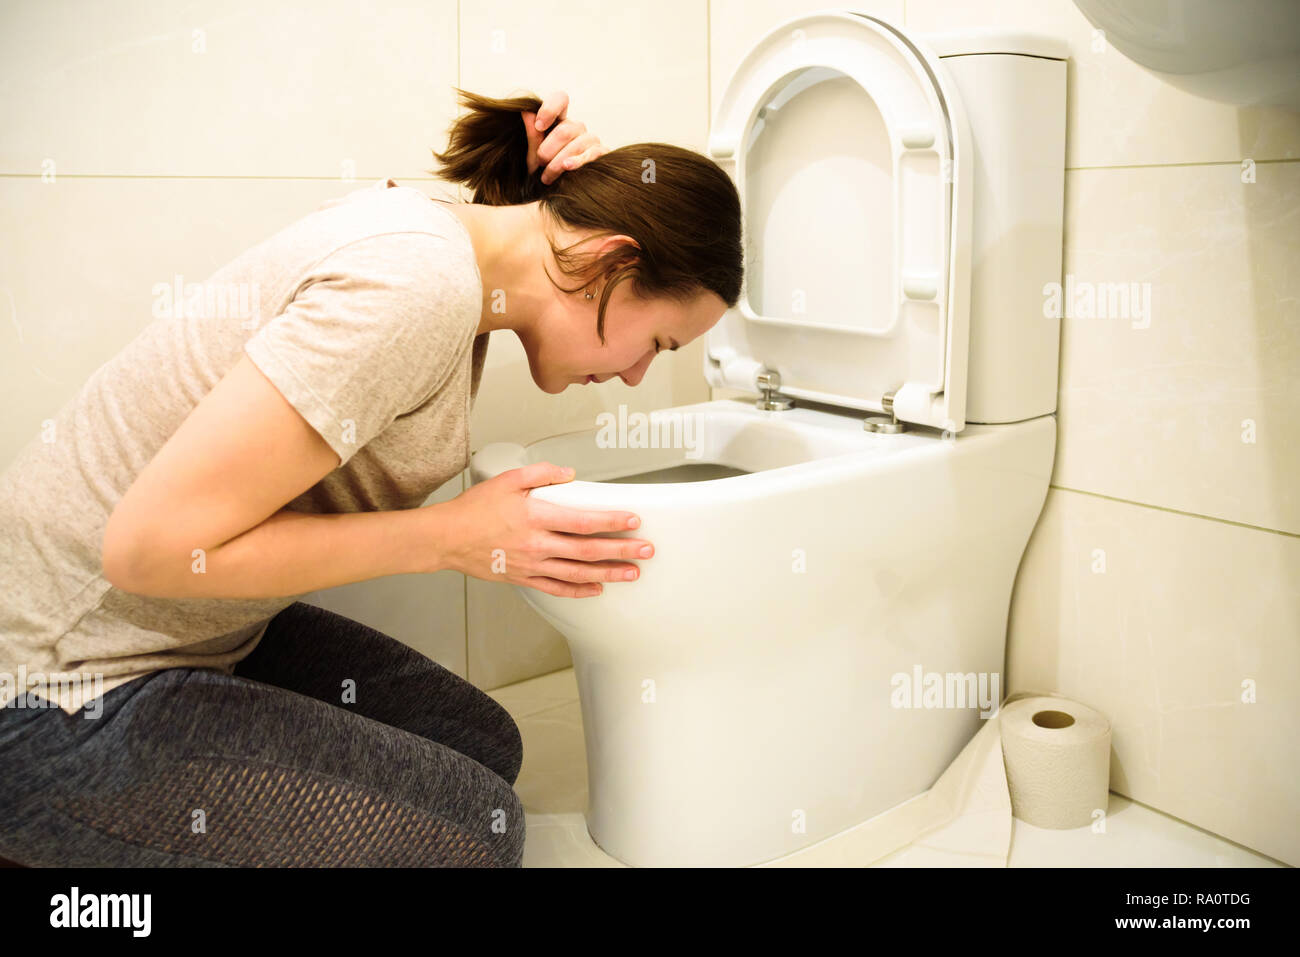 Young woman vomiting in toilet bowl at bathroom Stock Photo